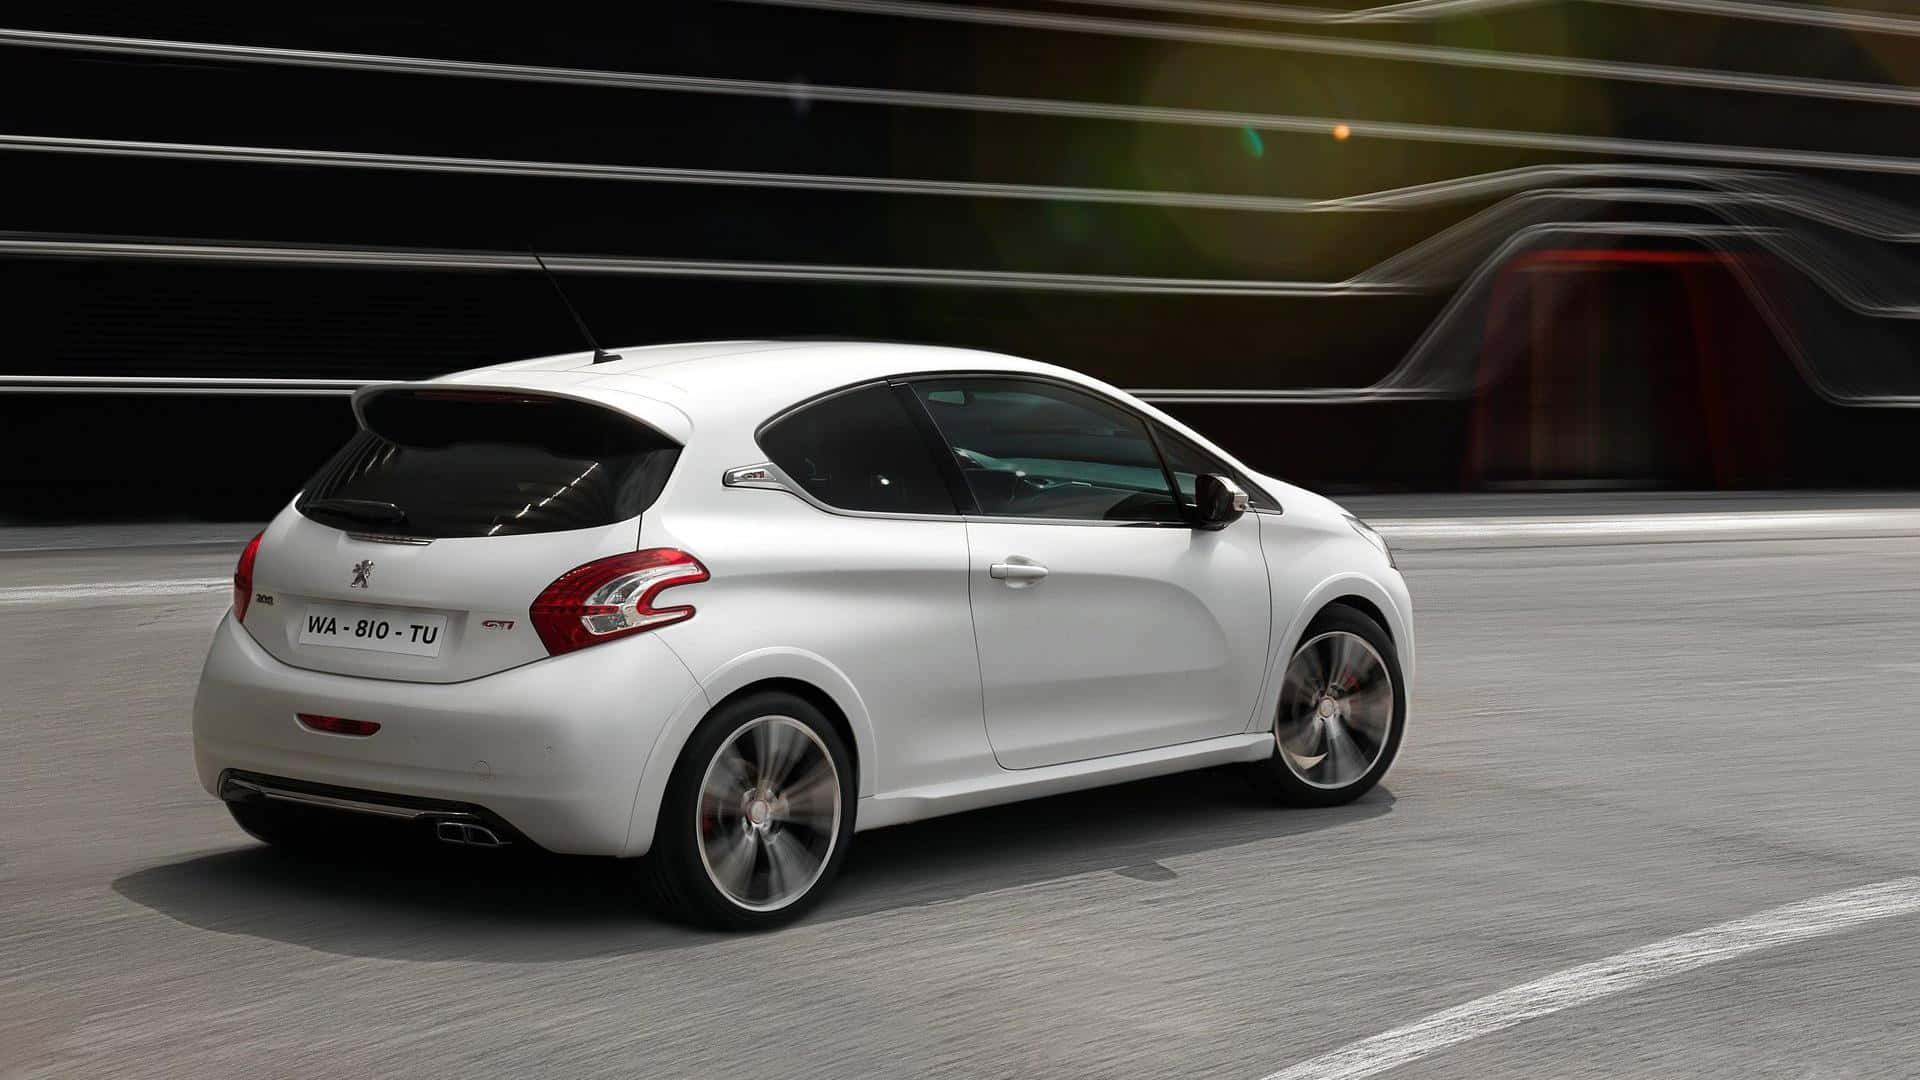 Sleek and Sophisticated Peugeot 208 on the Open Road Wallpaper